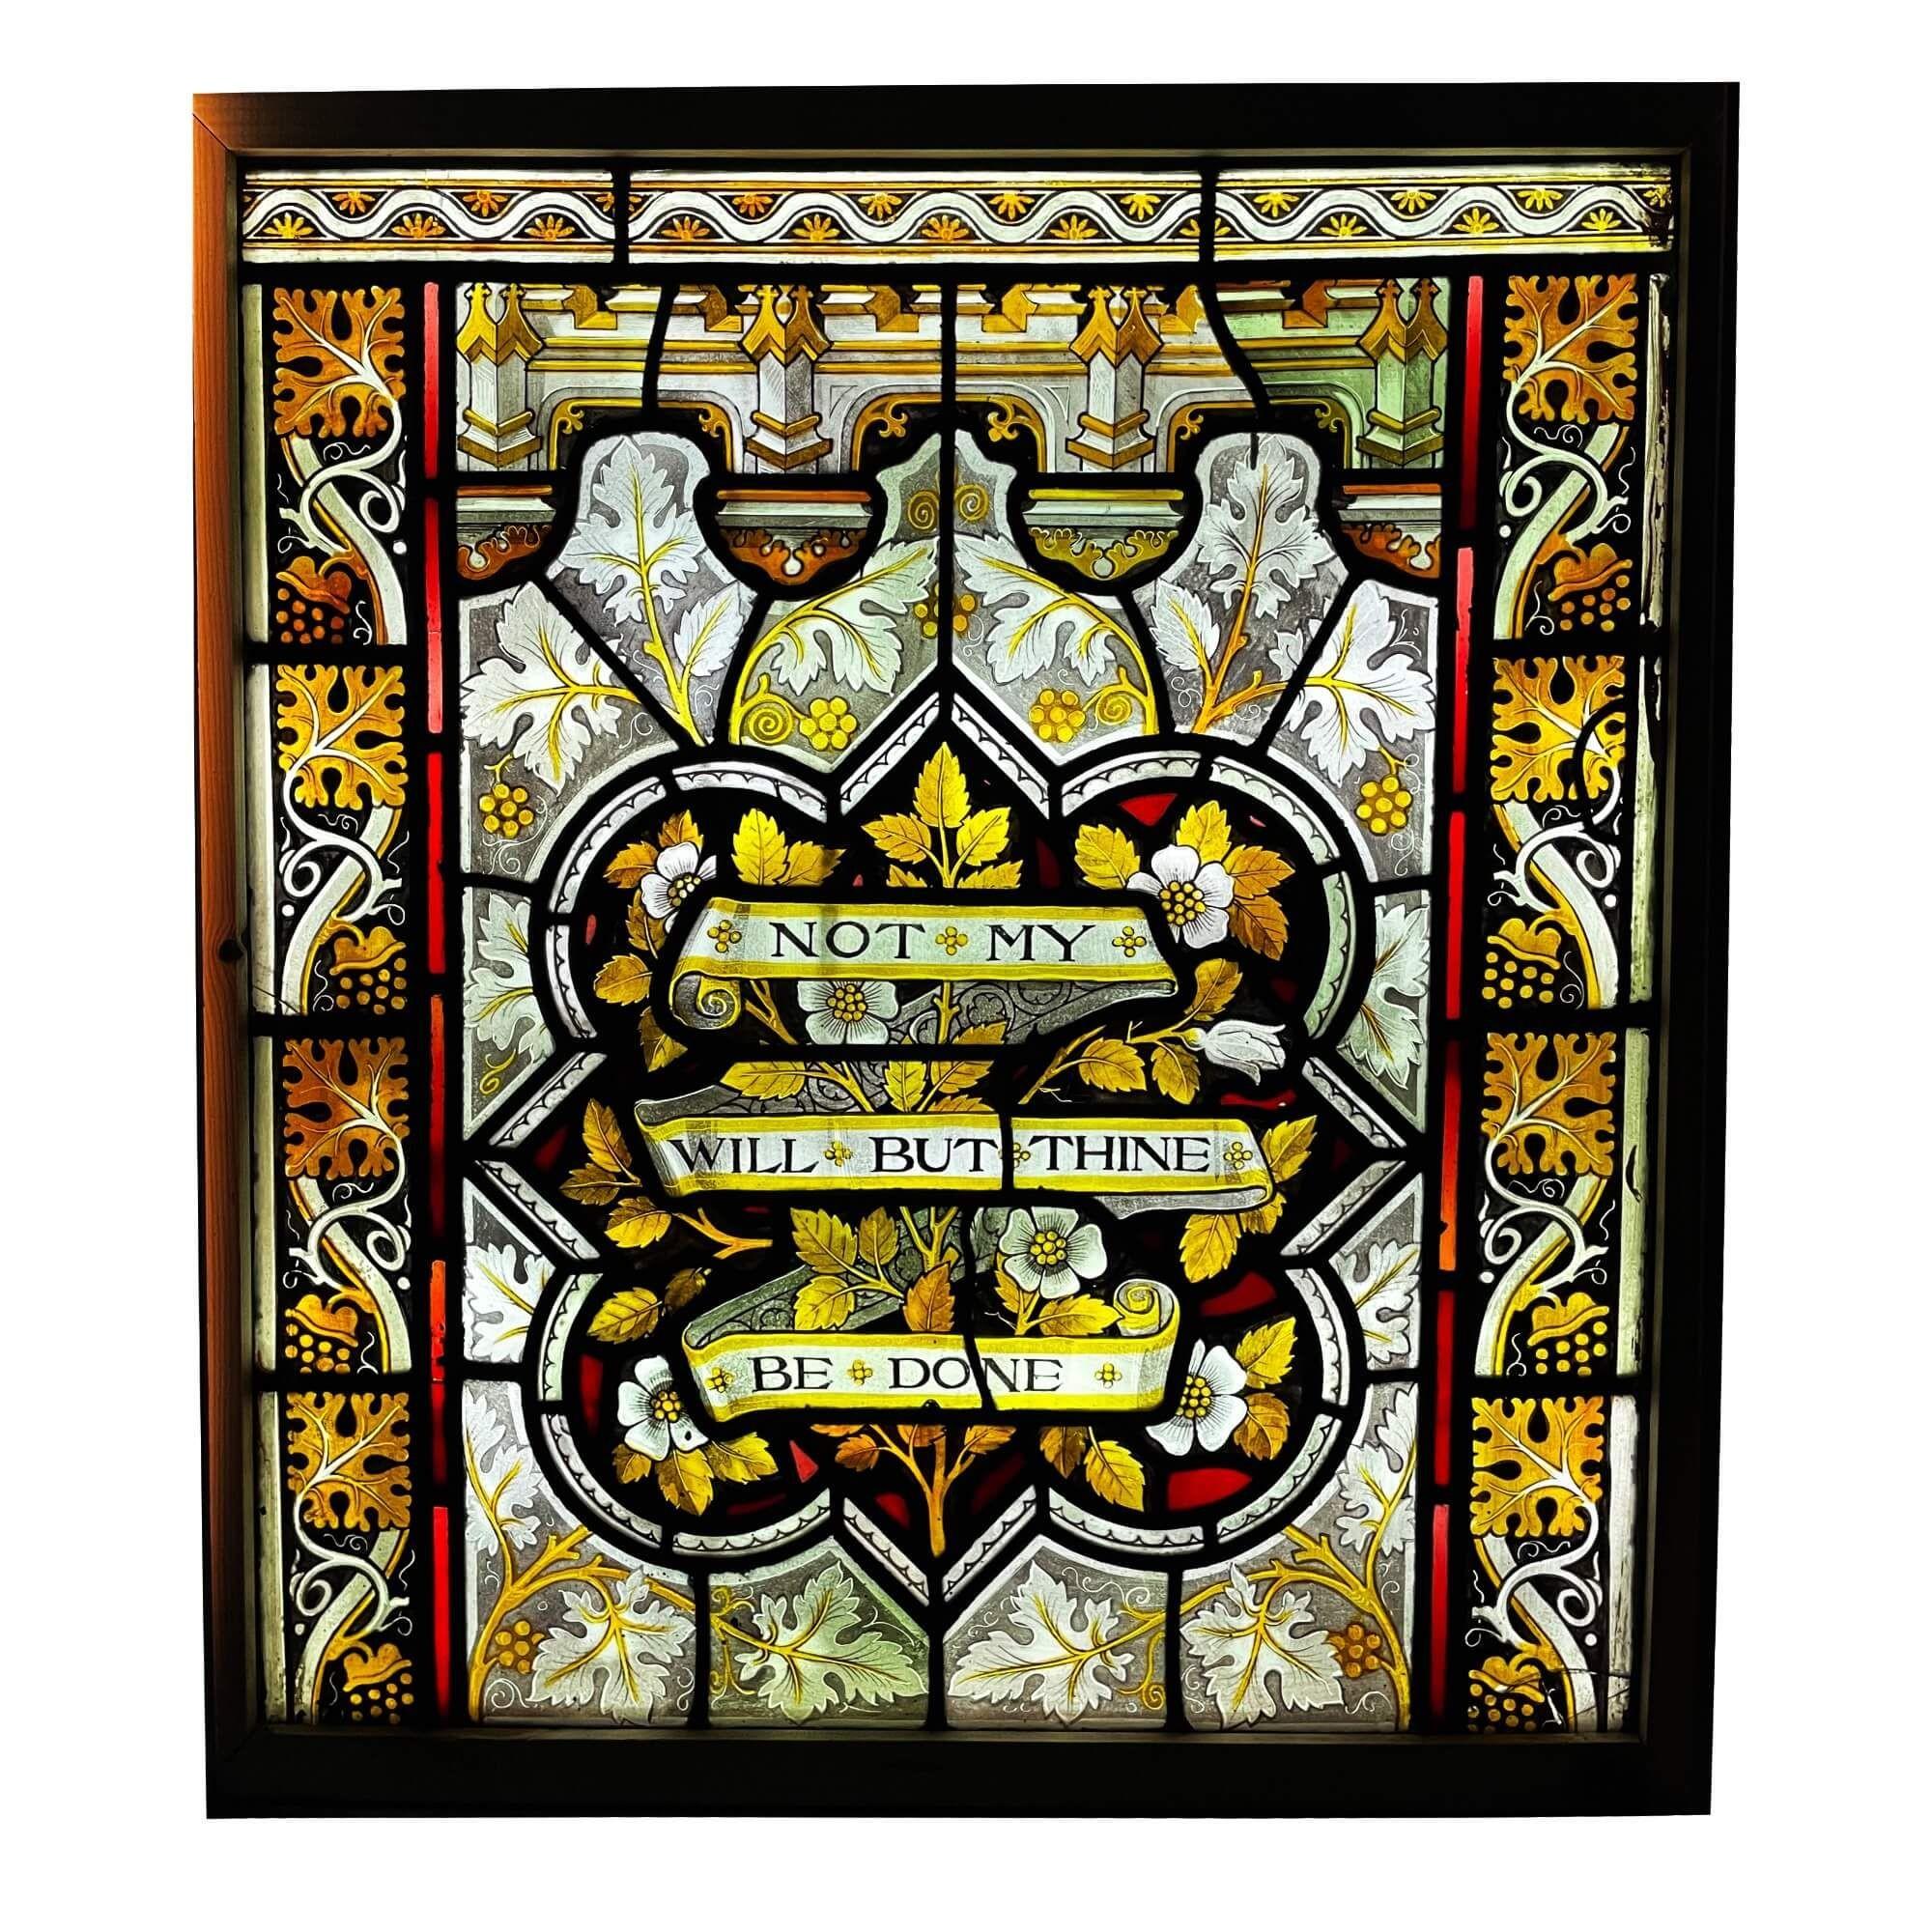 An antique ecclesiastical style stained glass window painted with the religious quote 